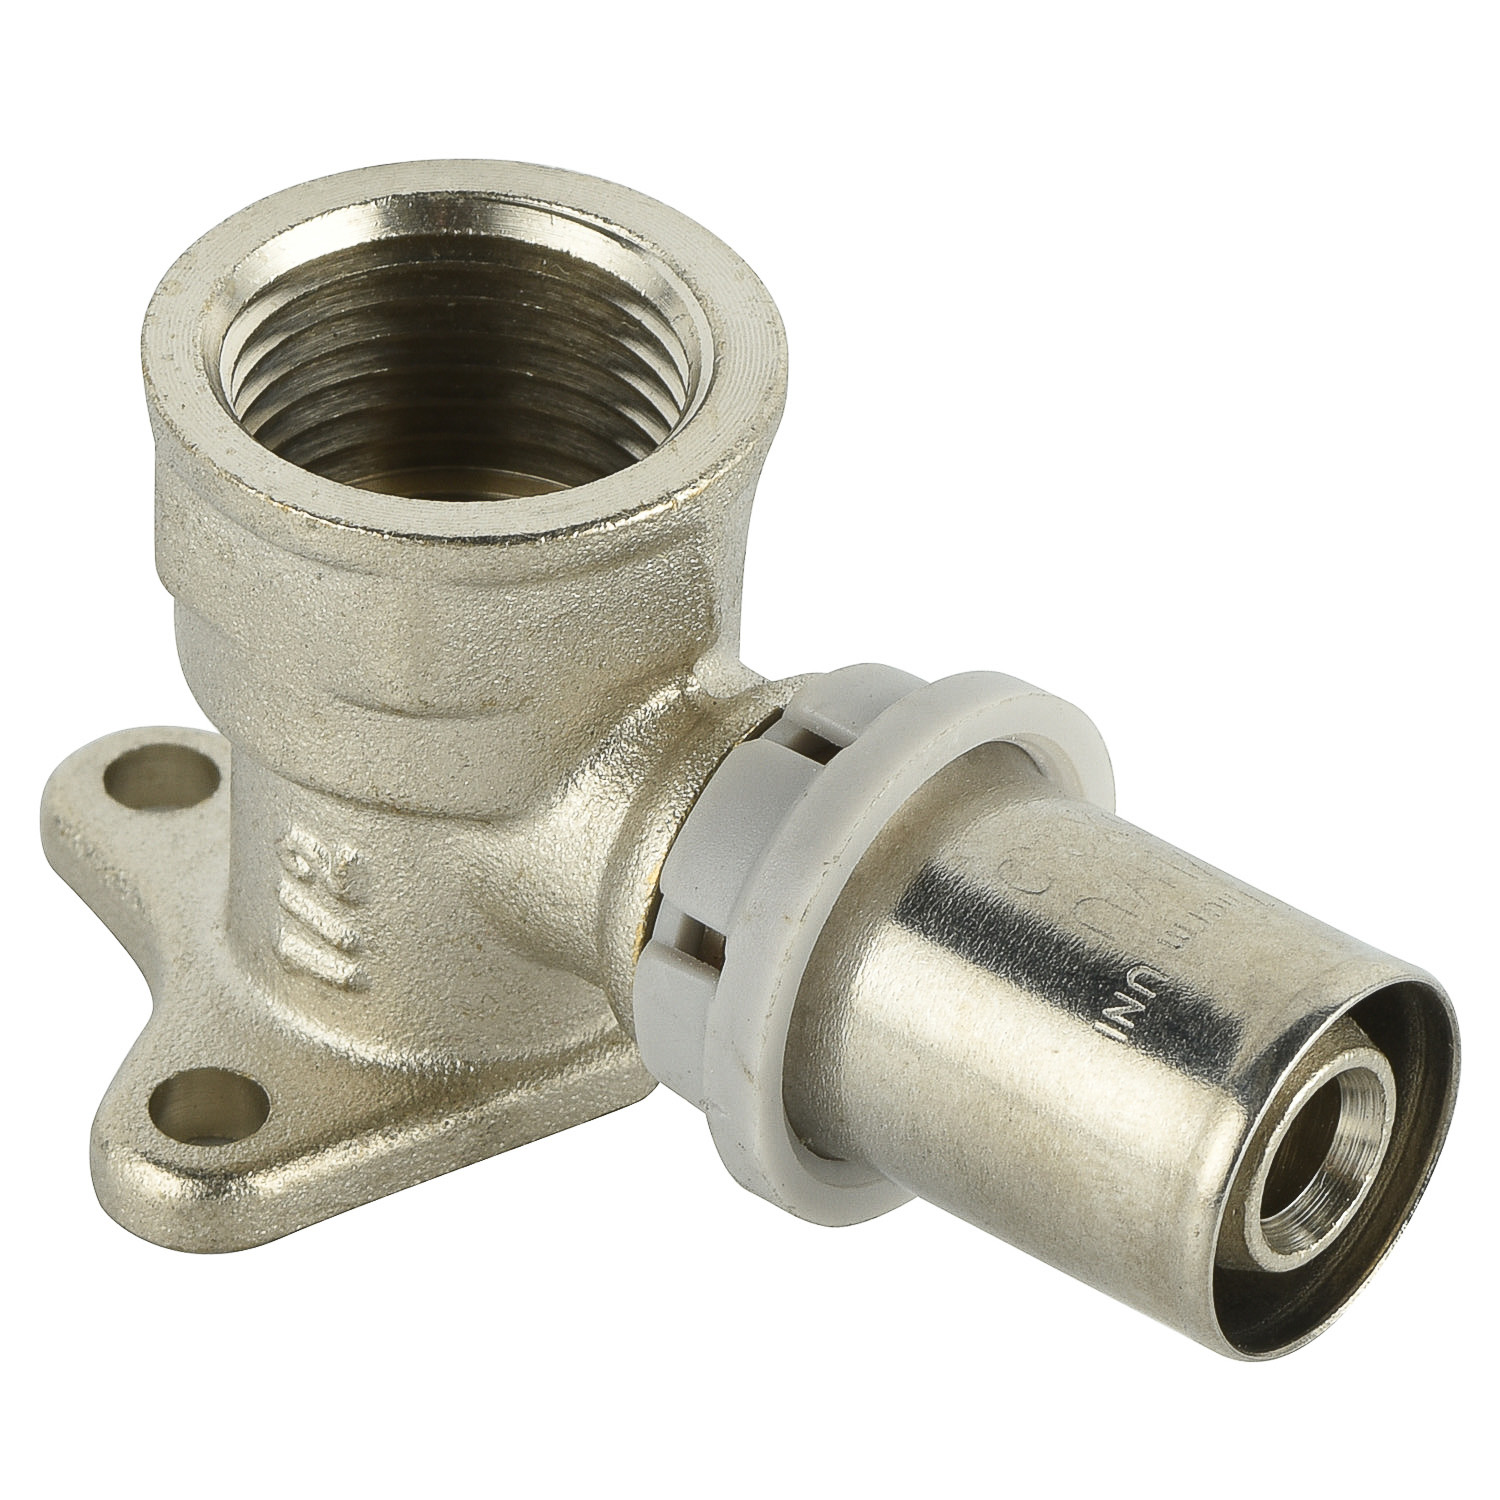 brass u type press striaight male connector fittings for plumbing heating multiayer pex al pex pipe